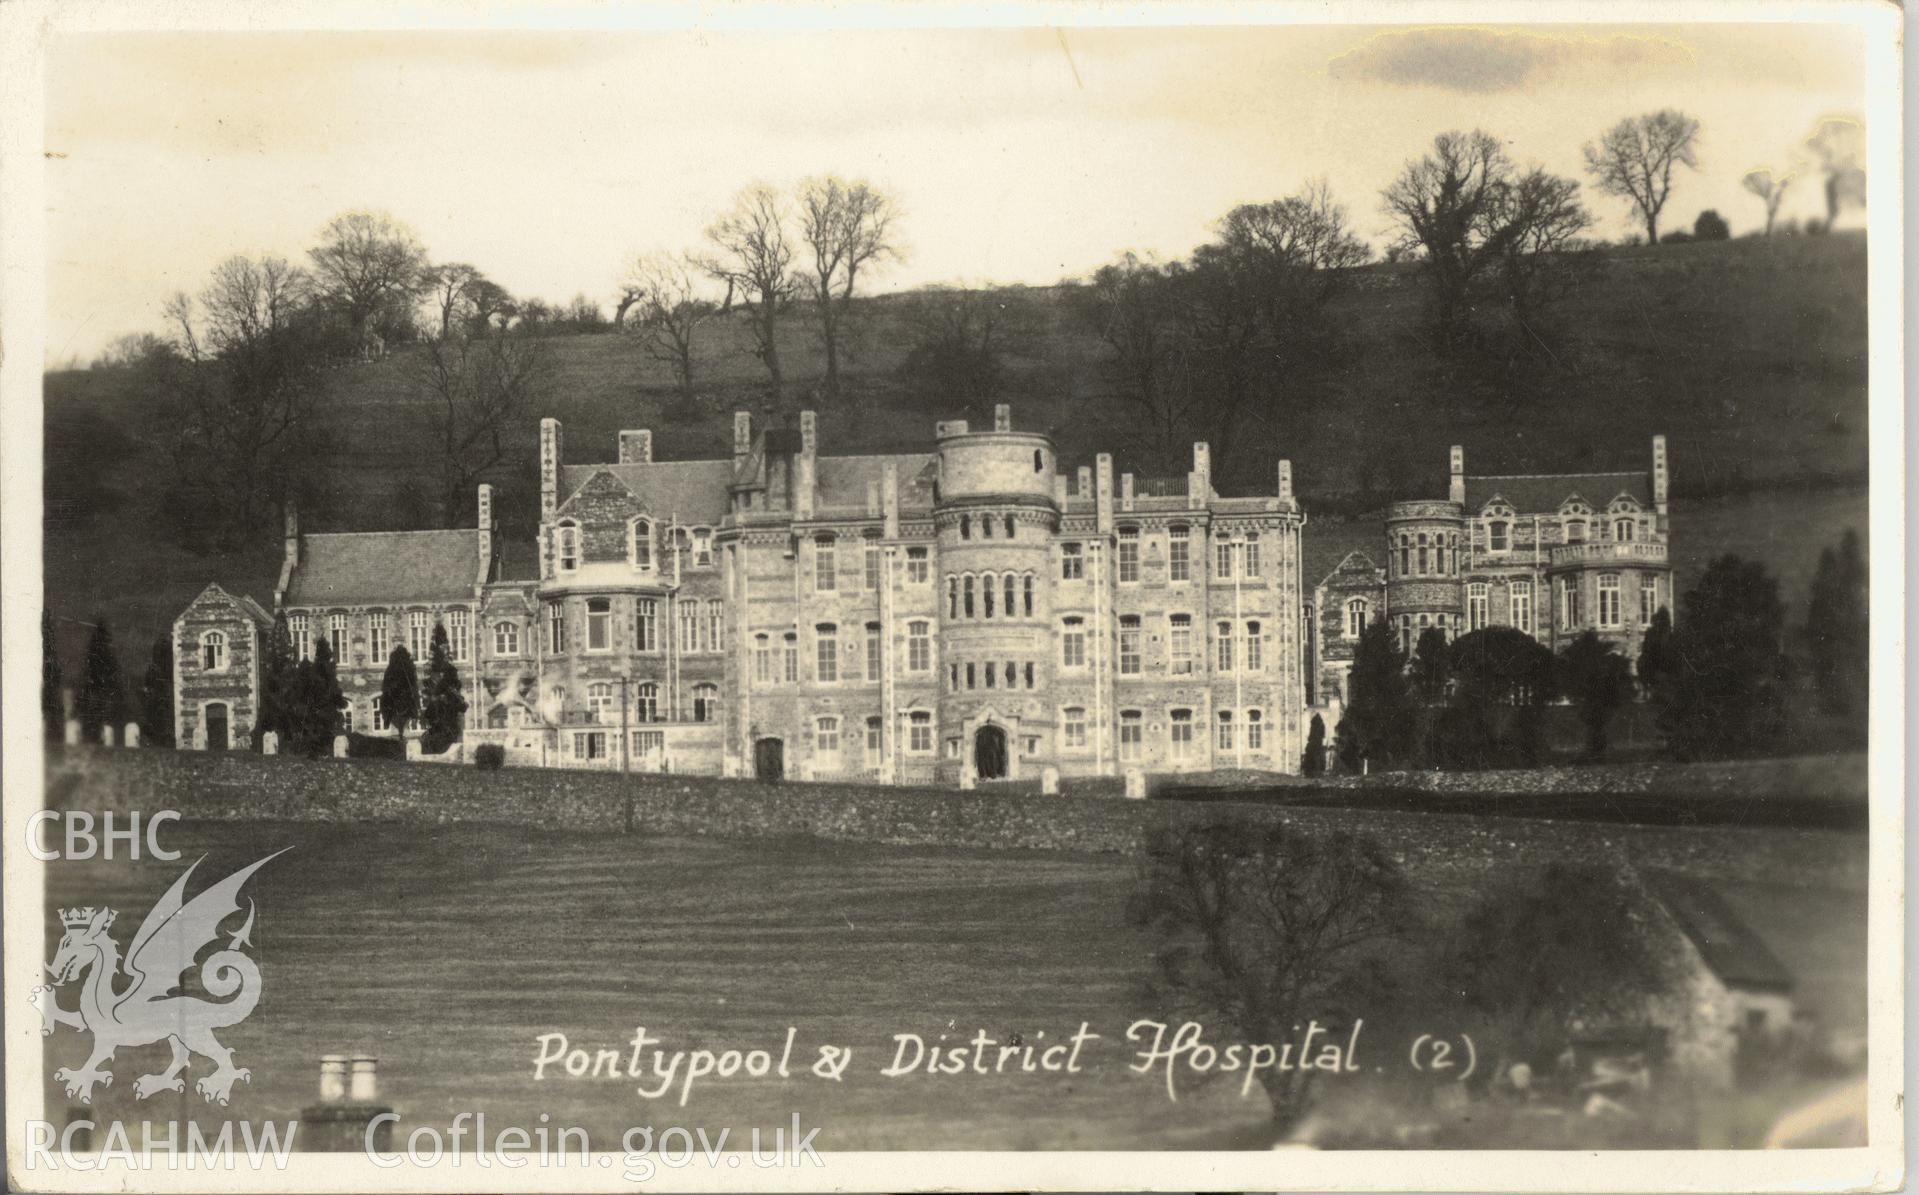 Digitised postcard image of Pontypool and District Hospital. Produced by Parks and Gardens Data Services, from an original item in the Peter Davis Collection at Parks and Gardens UK. We hold only web-resolution images of this collection, suitable for viewing on screen and for research purposes only. We do not hold the original images, or publication quality scans.